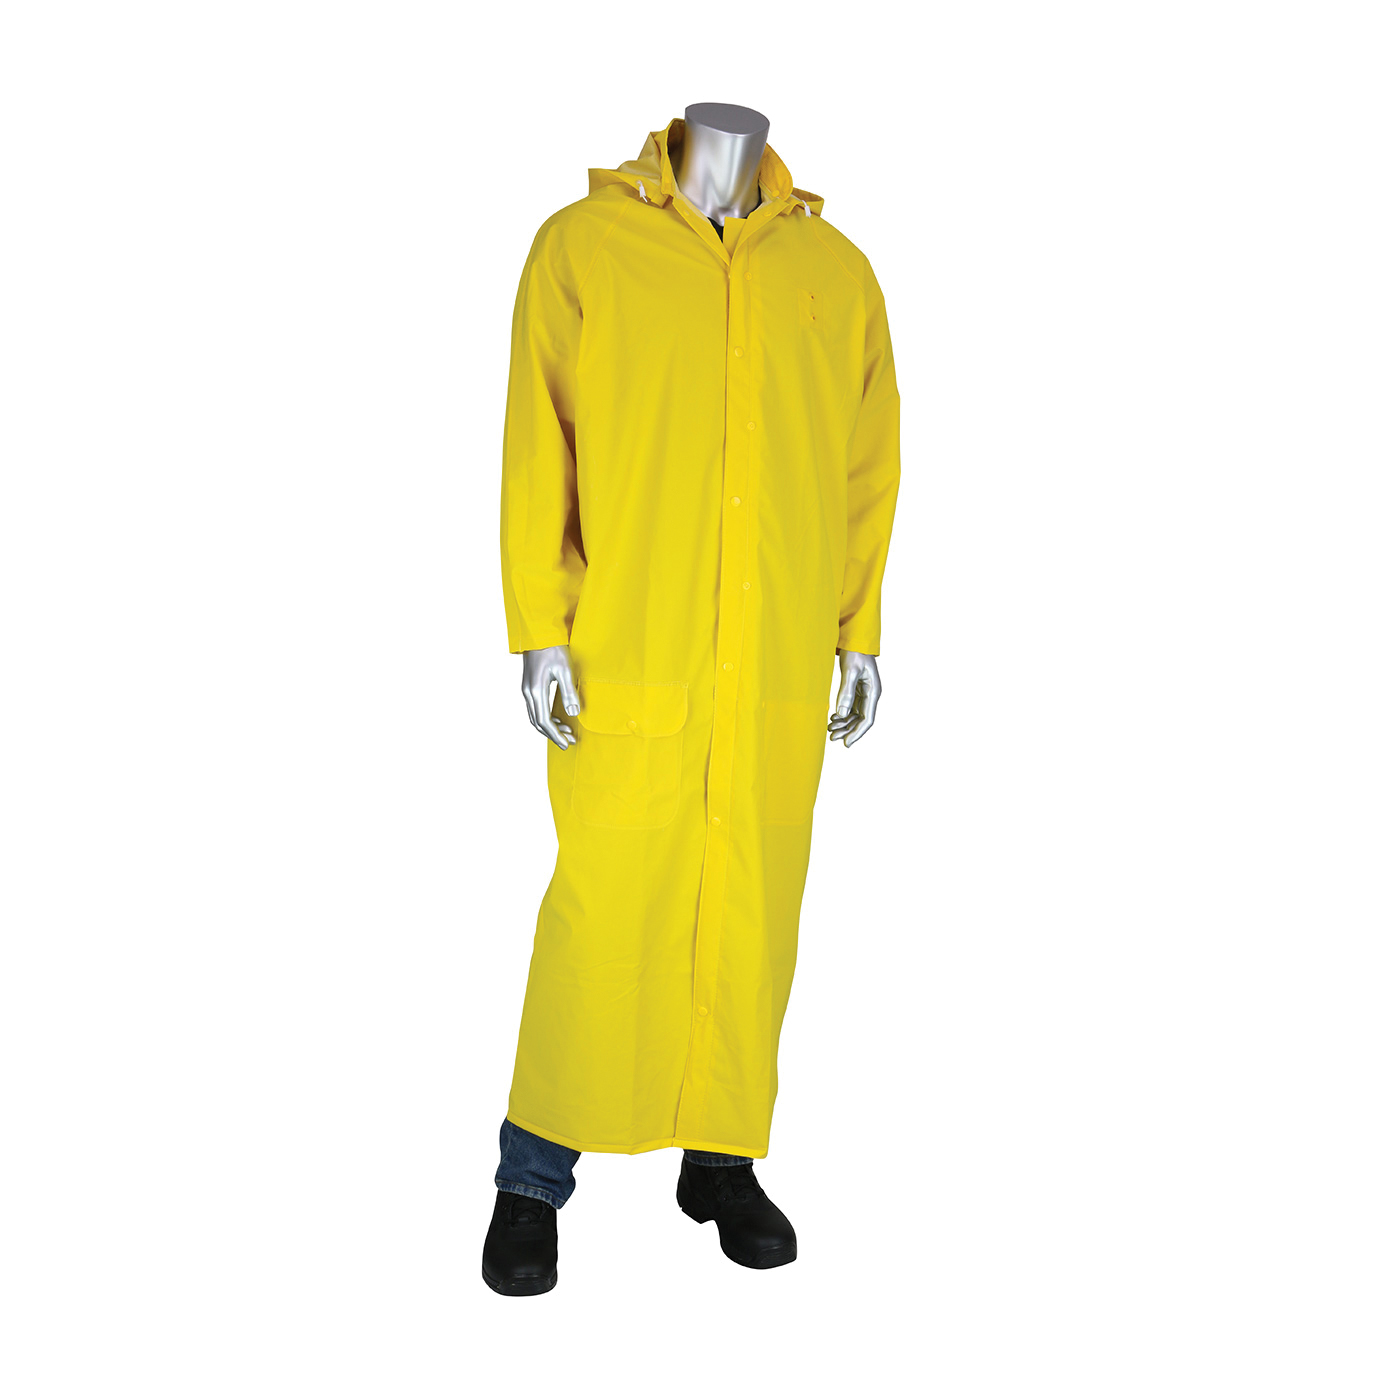 PIP® FALCON™ Base35FR™ 205-320FR/S Premium Waterproof Duster Rain Coat With Limited Flammability, Unisex, S, Yellow, Corduroy/Polyester/PVC, Resists: Flame and Water, Specifications Met: ASTM D6413